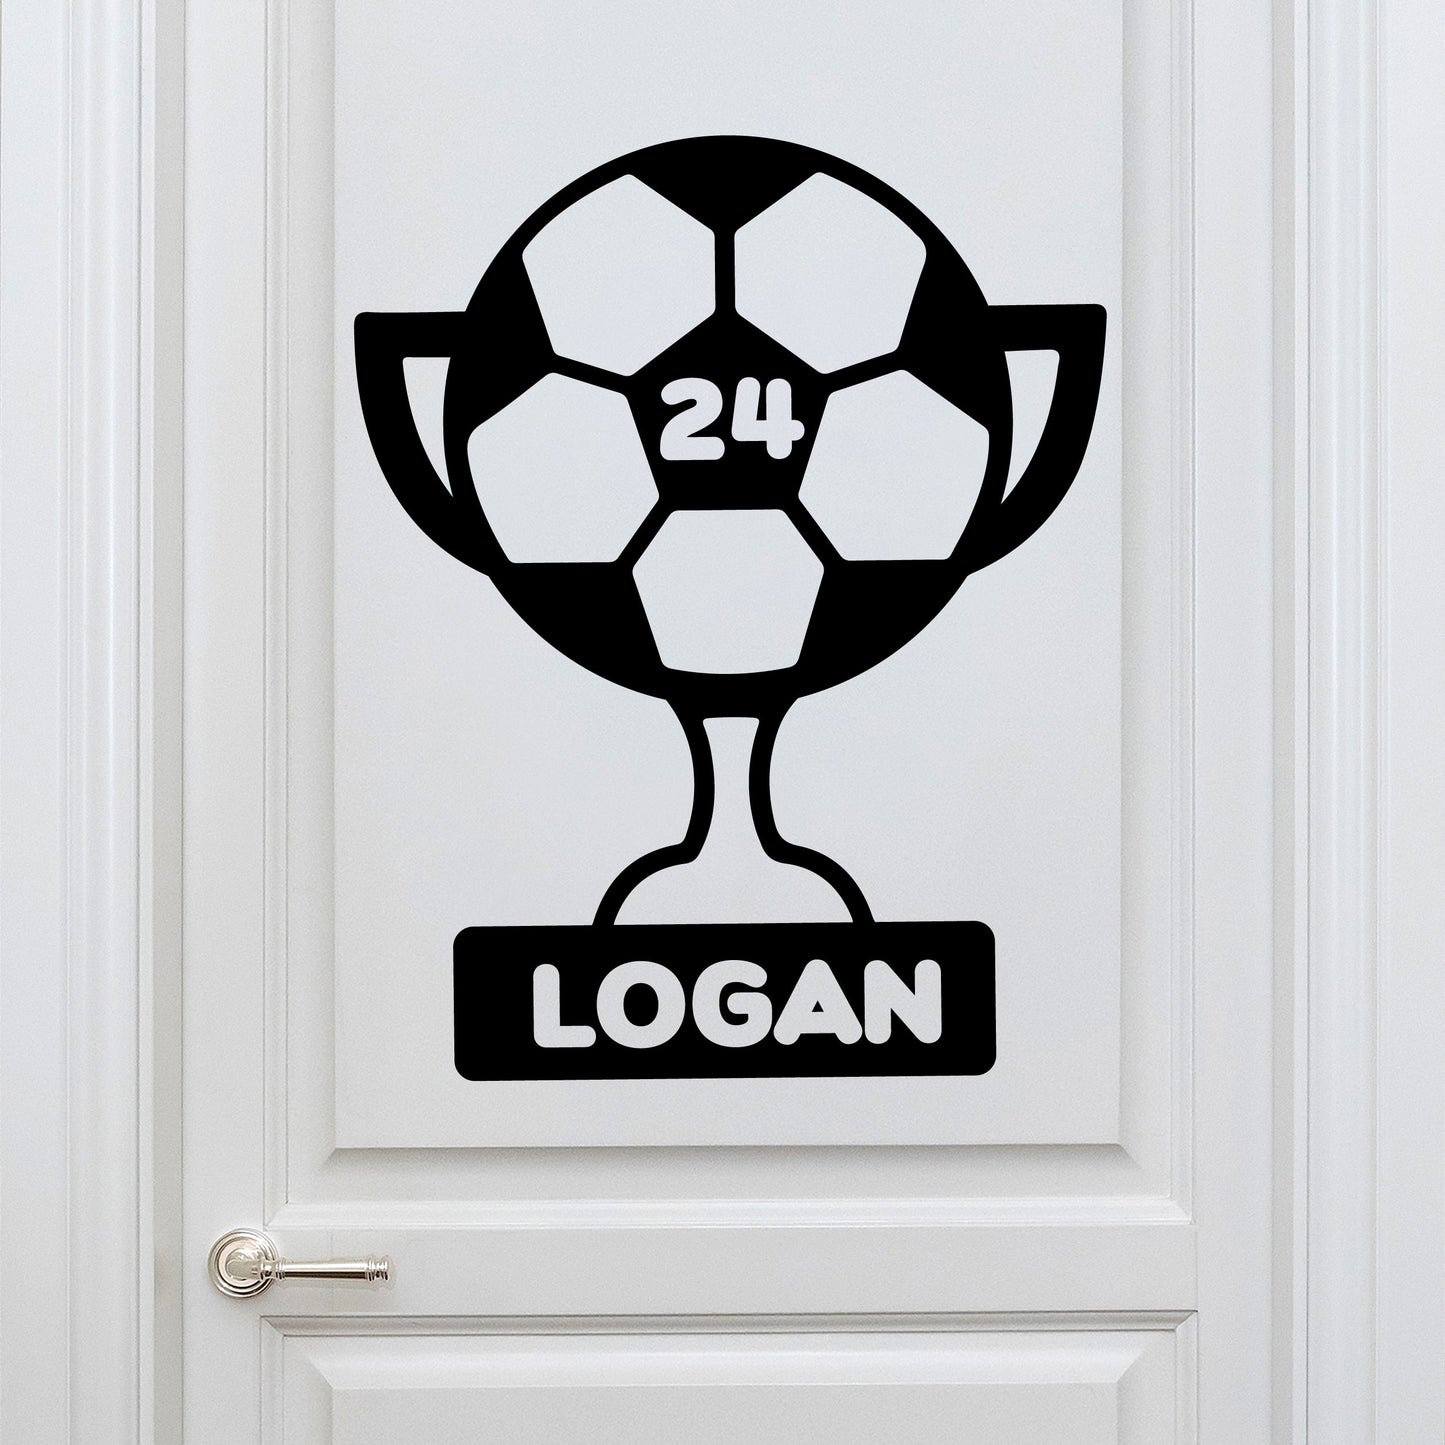 Wall Decals Soccer - Custom Soccer Name Wall Decal - Customized Soccer Wall Decals - Large Soccer Player Wall Decal